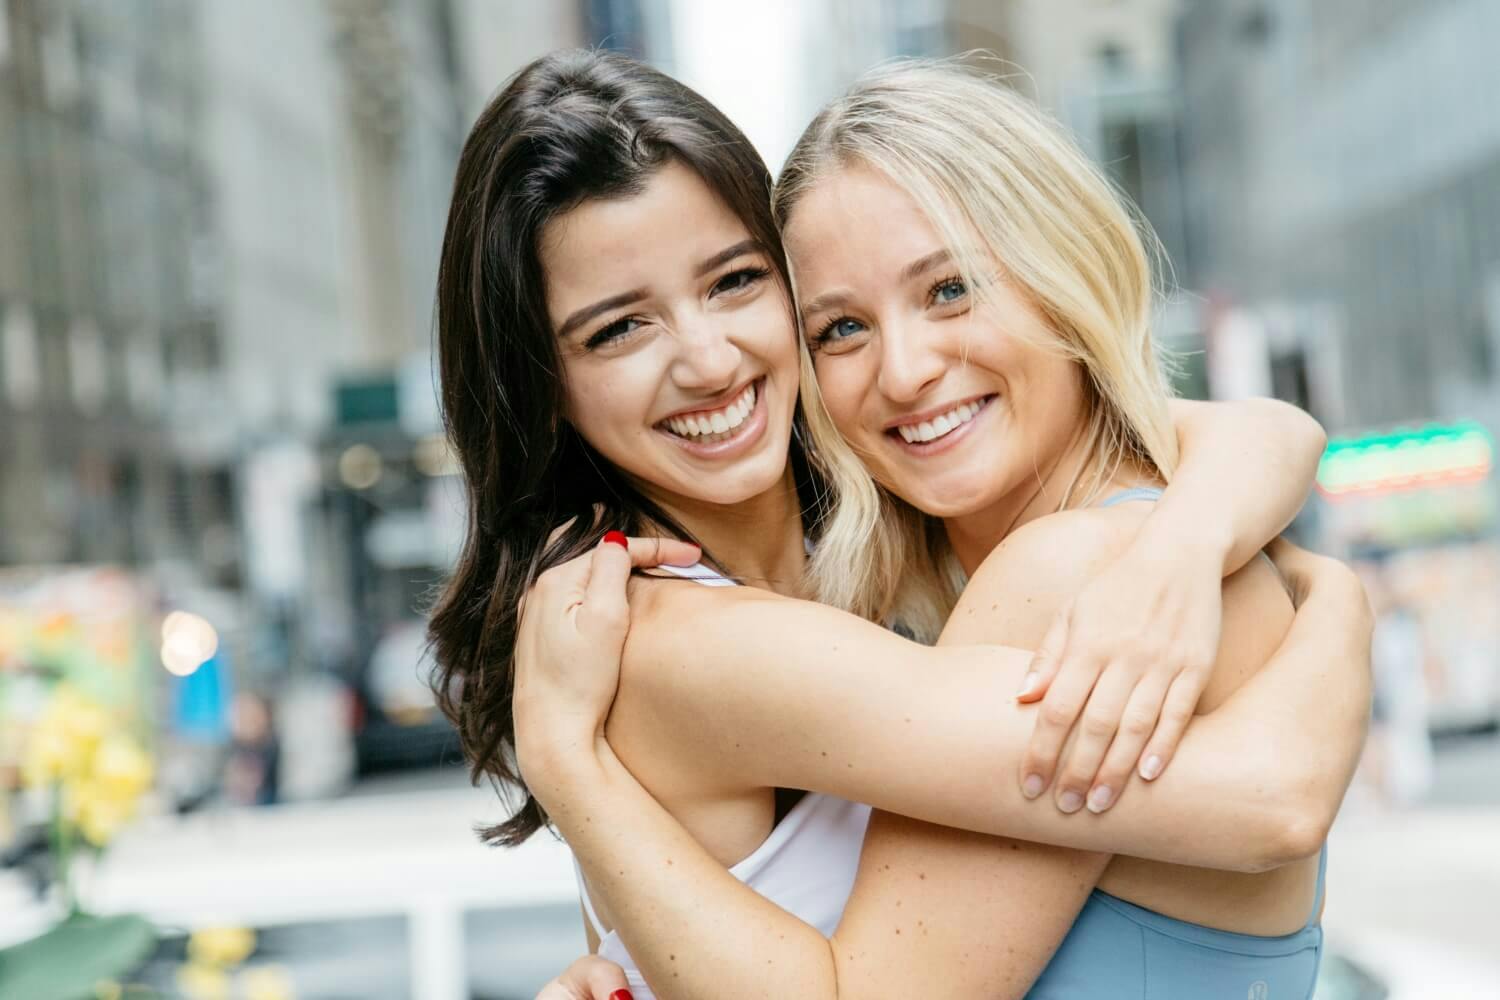 Two women smiling and embracing each other on a city street